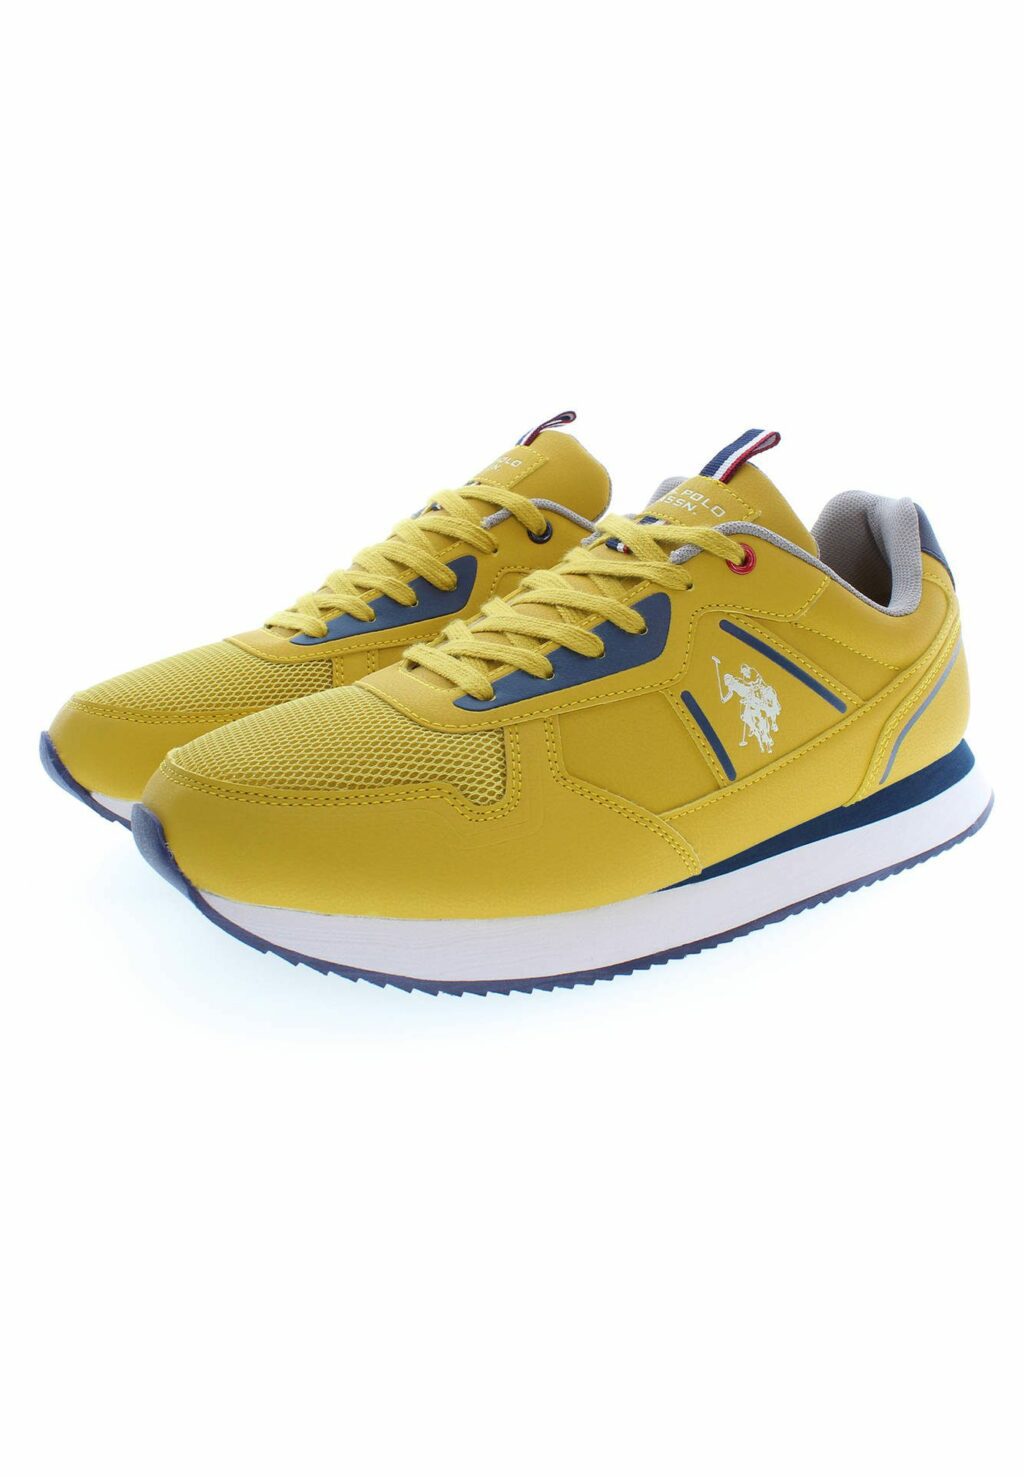 US POLO BEST PRICE YELLOW MEN'S SPORTS SHOES NOBIL004MBYM1_GIALLO_YEL001